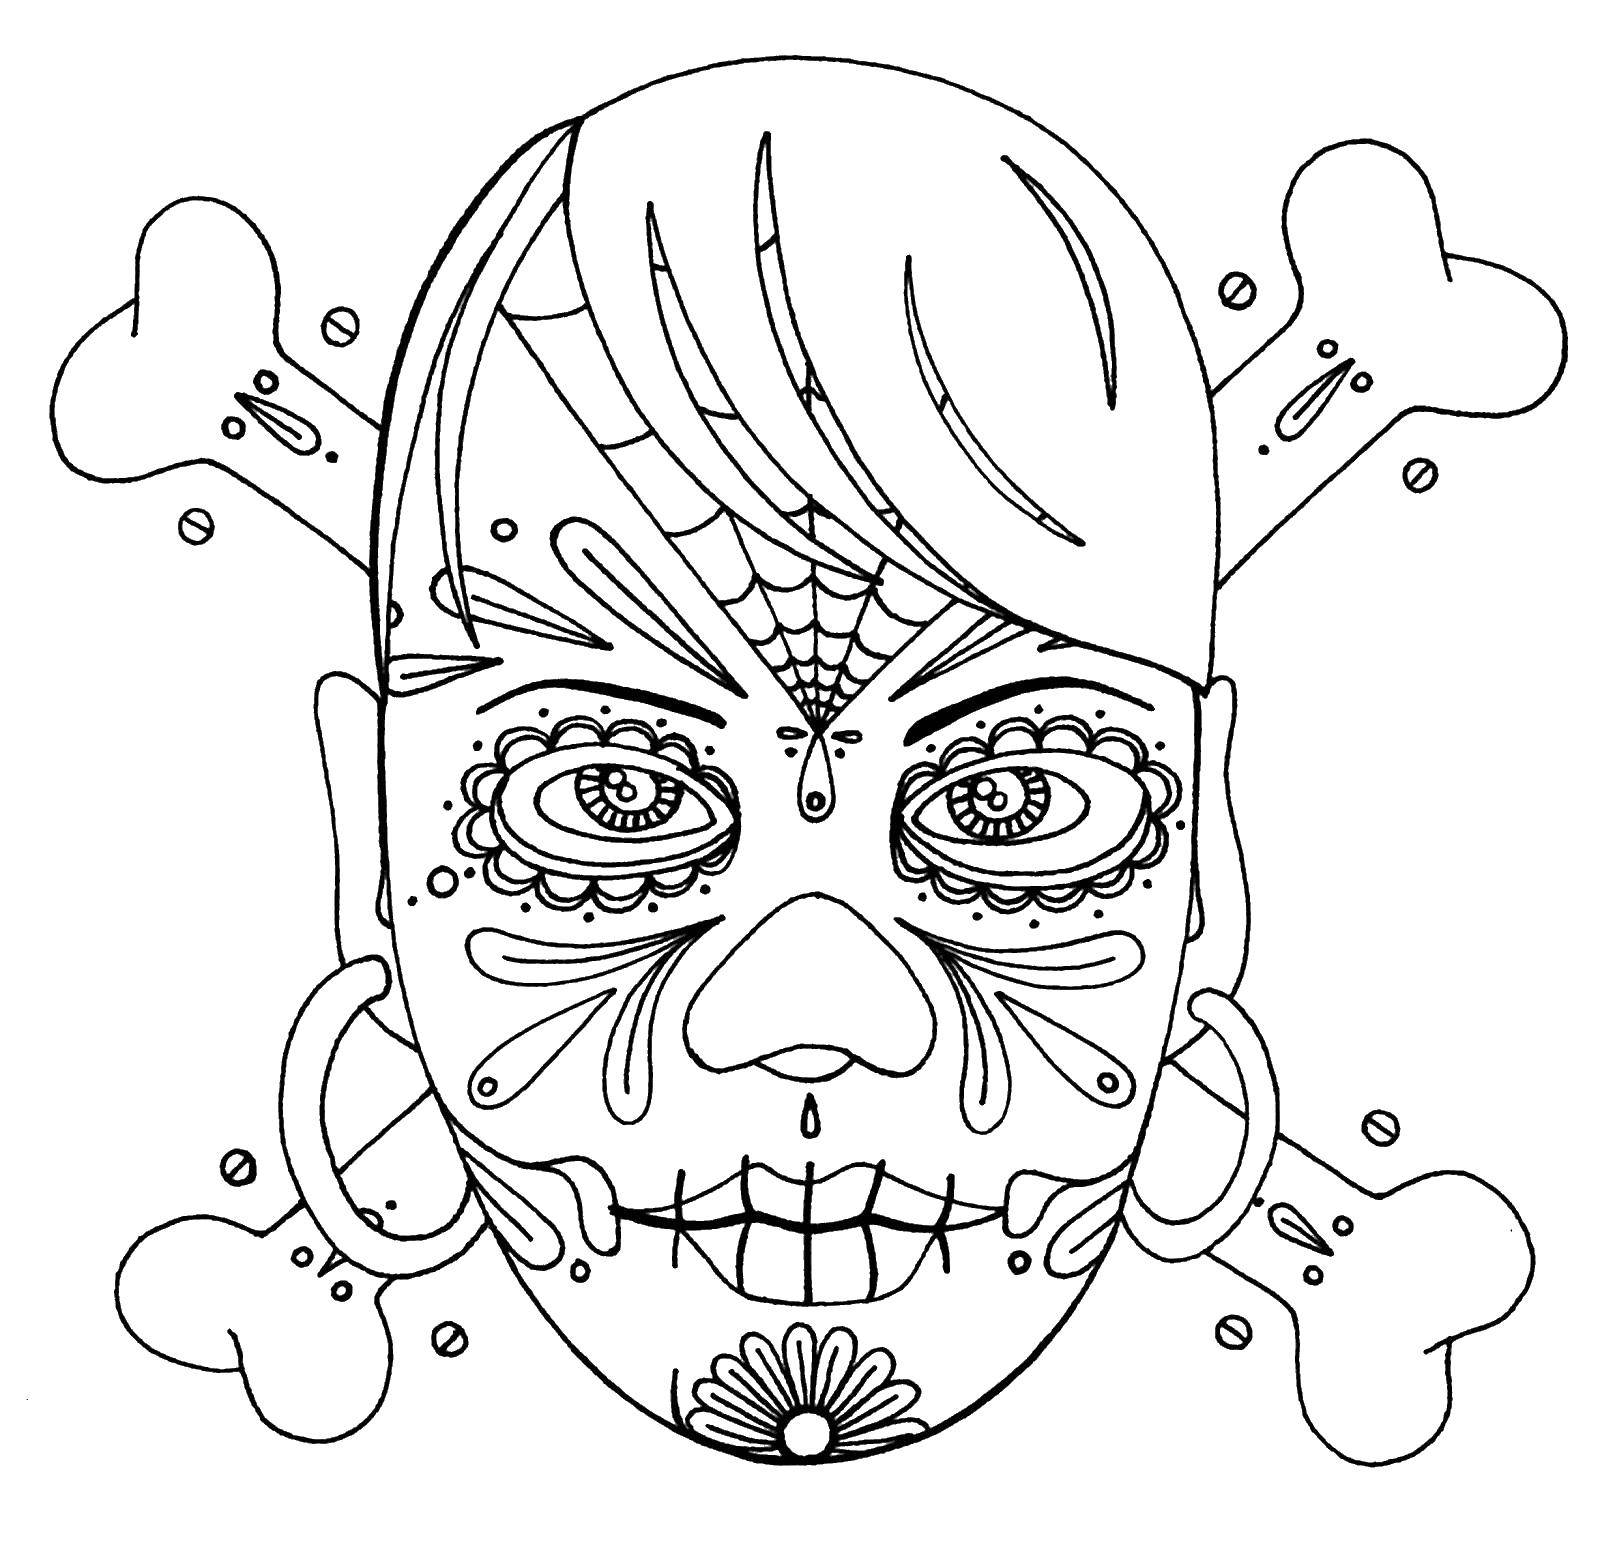 Coloring Face patterns. Category Skull. Tags:  Skull, patterns.